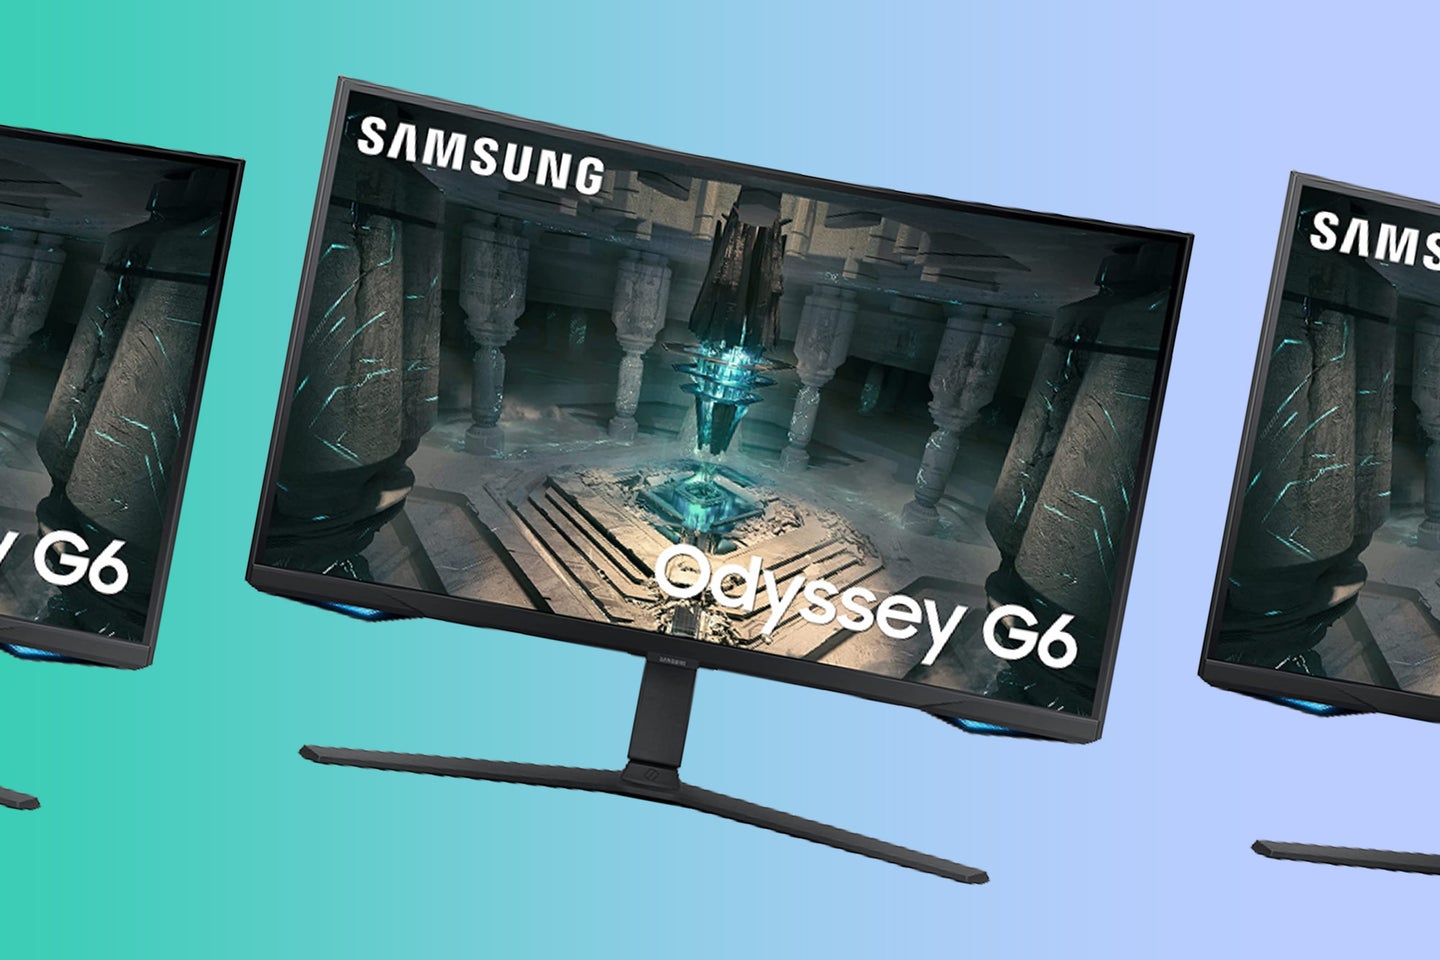 A Samsung G6 monitor on a teal and periwinkle background